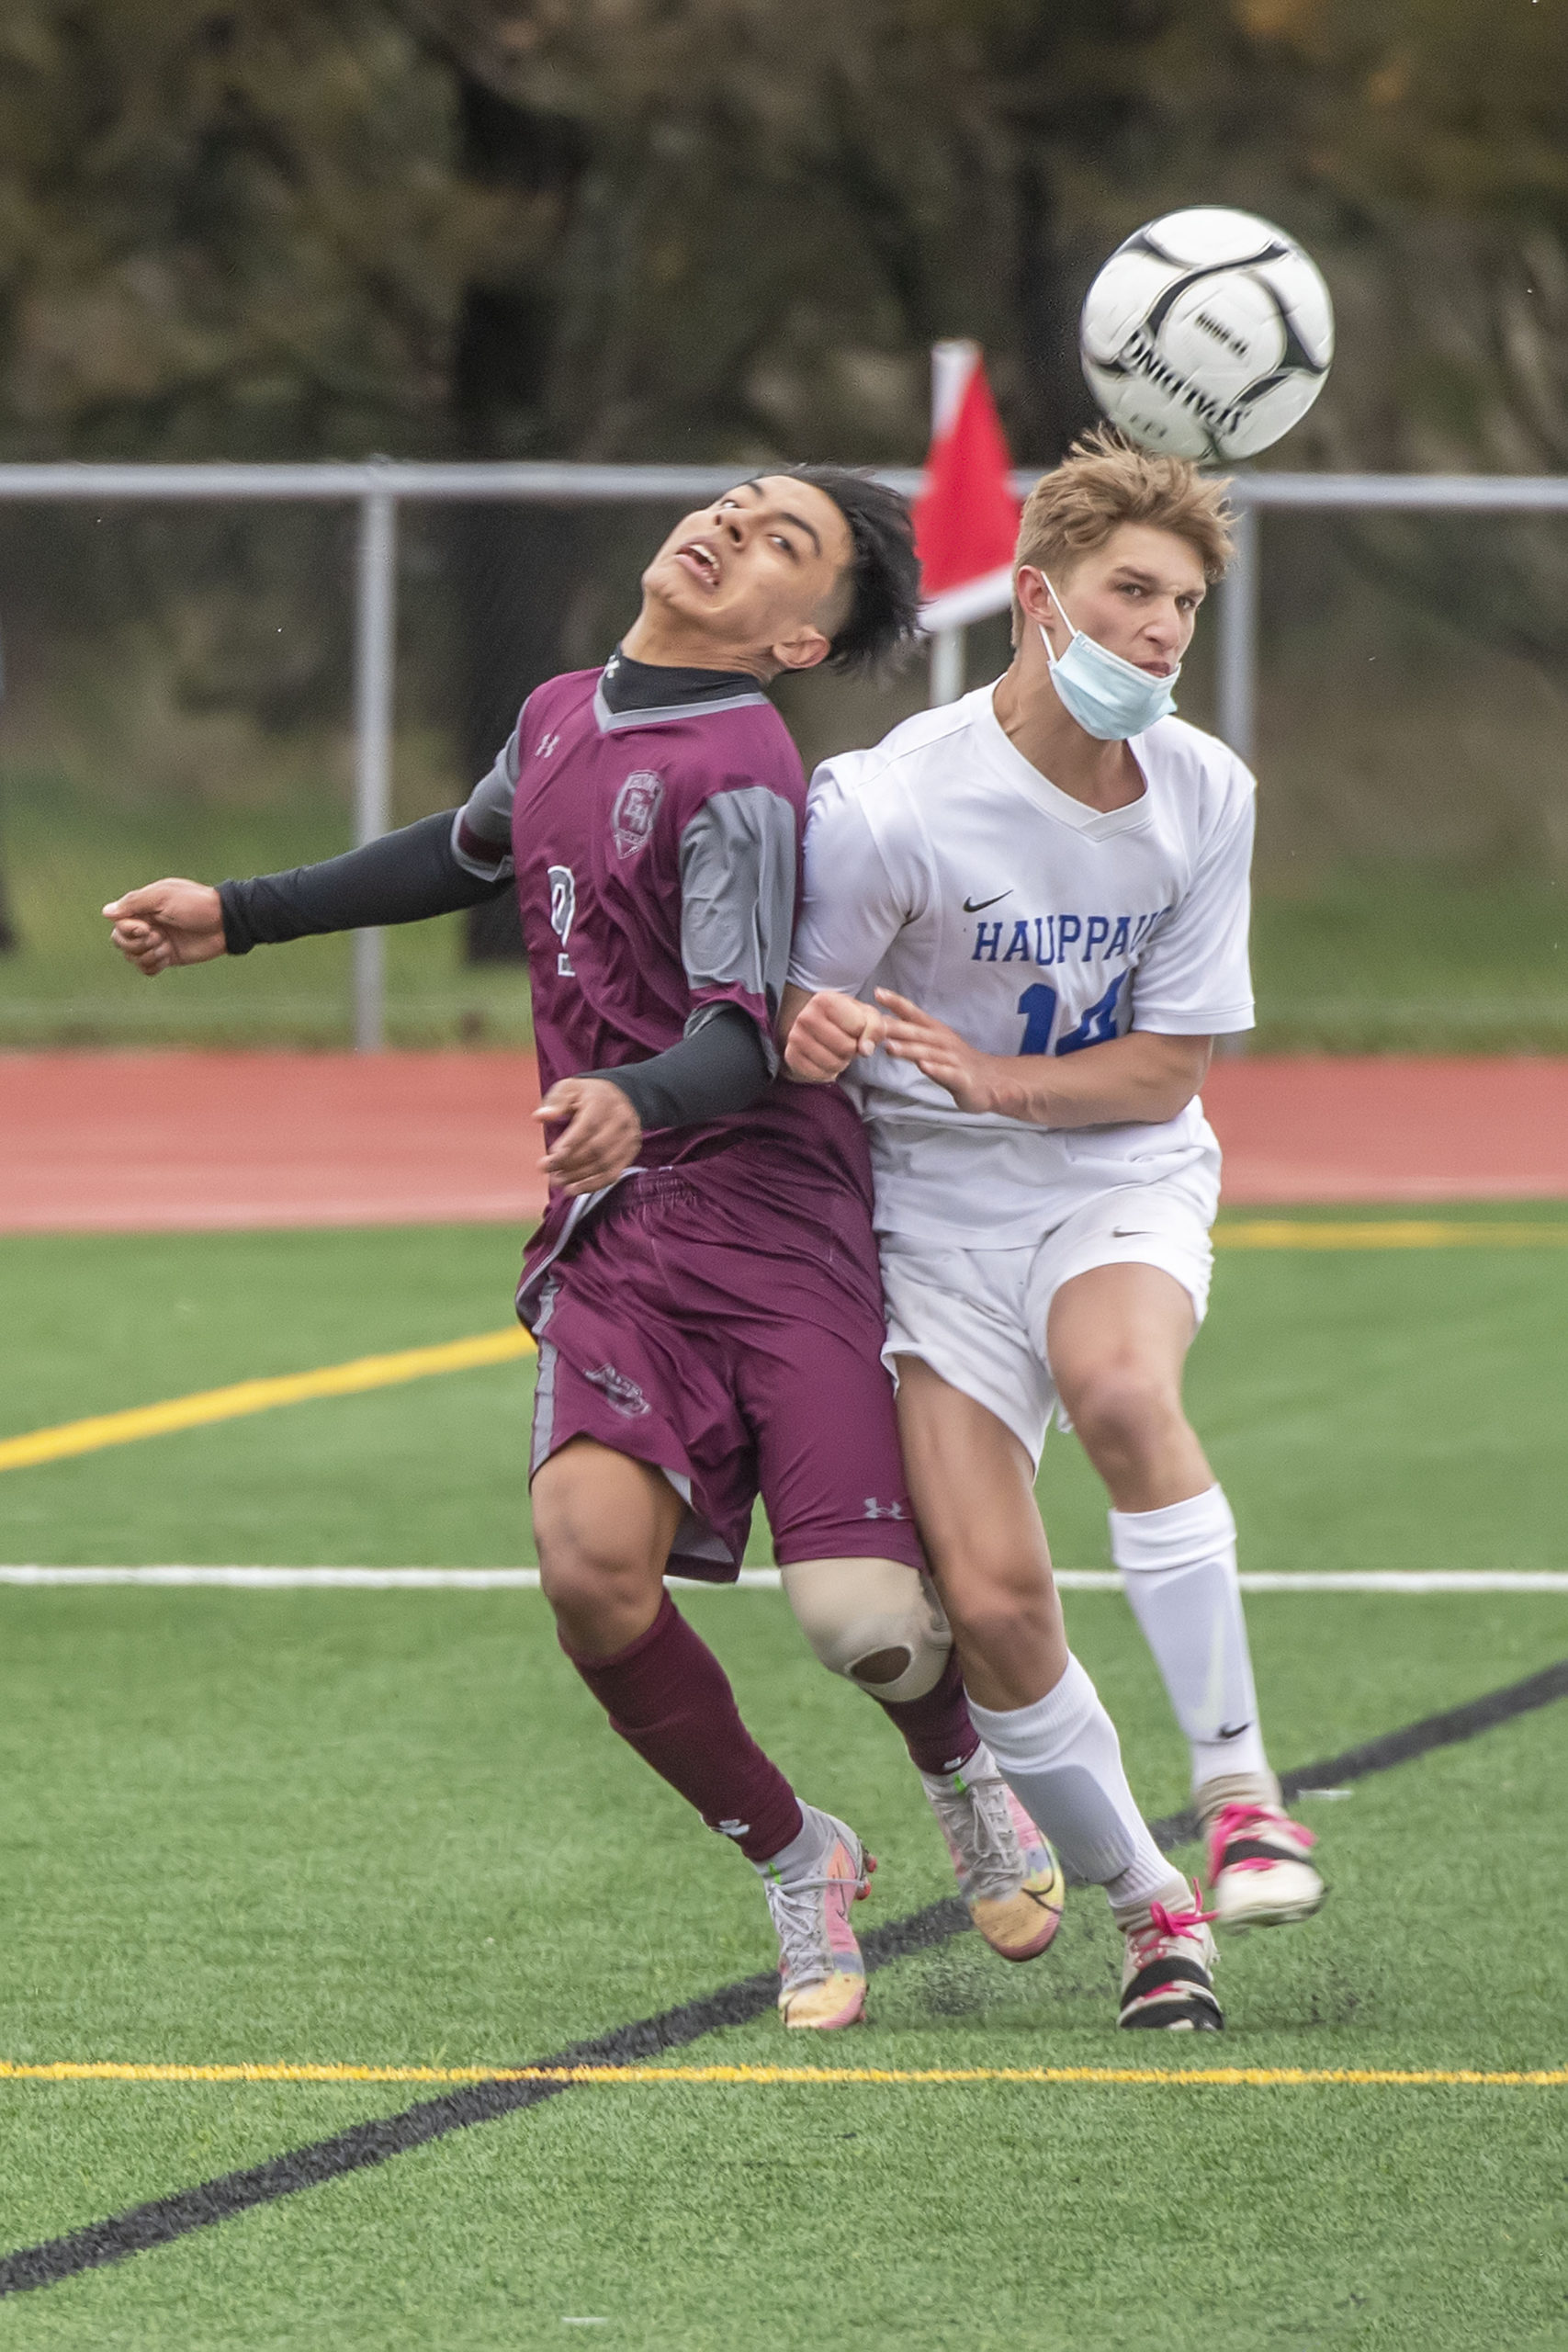 East Hampton sophomore Eric Armijos gets pushed from behind by a Hauppauge player.